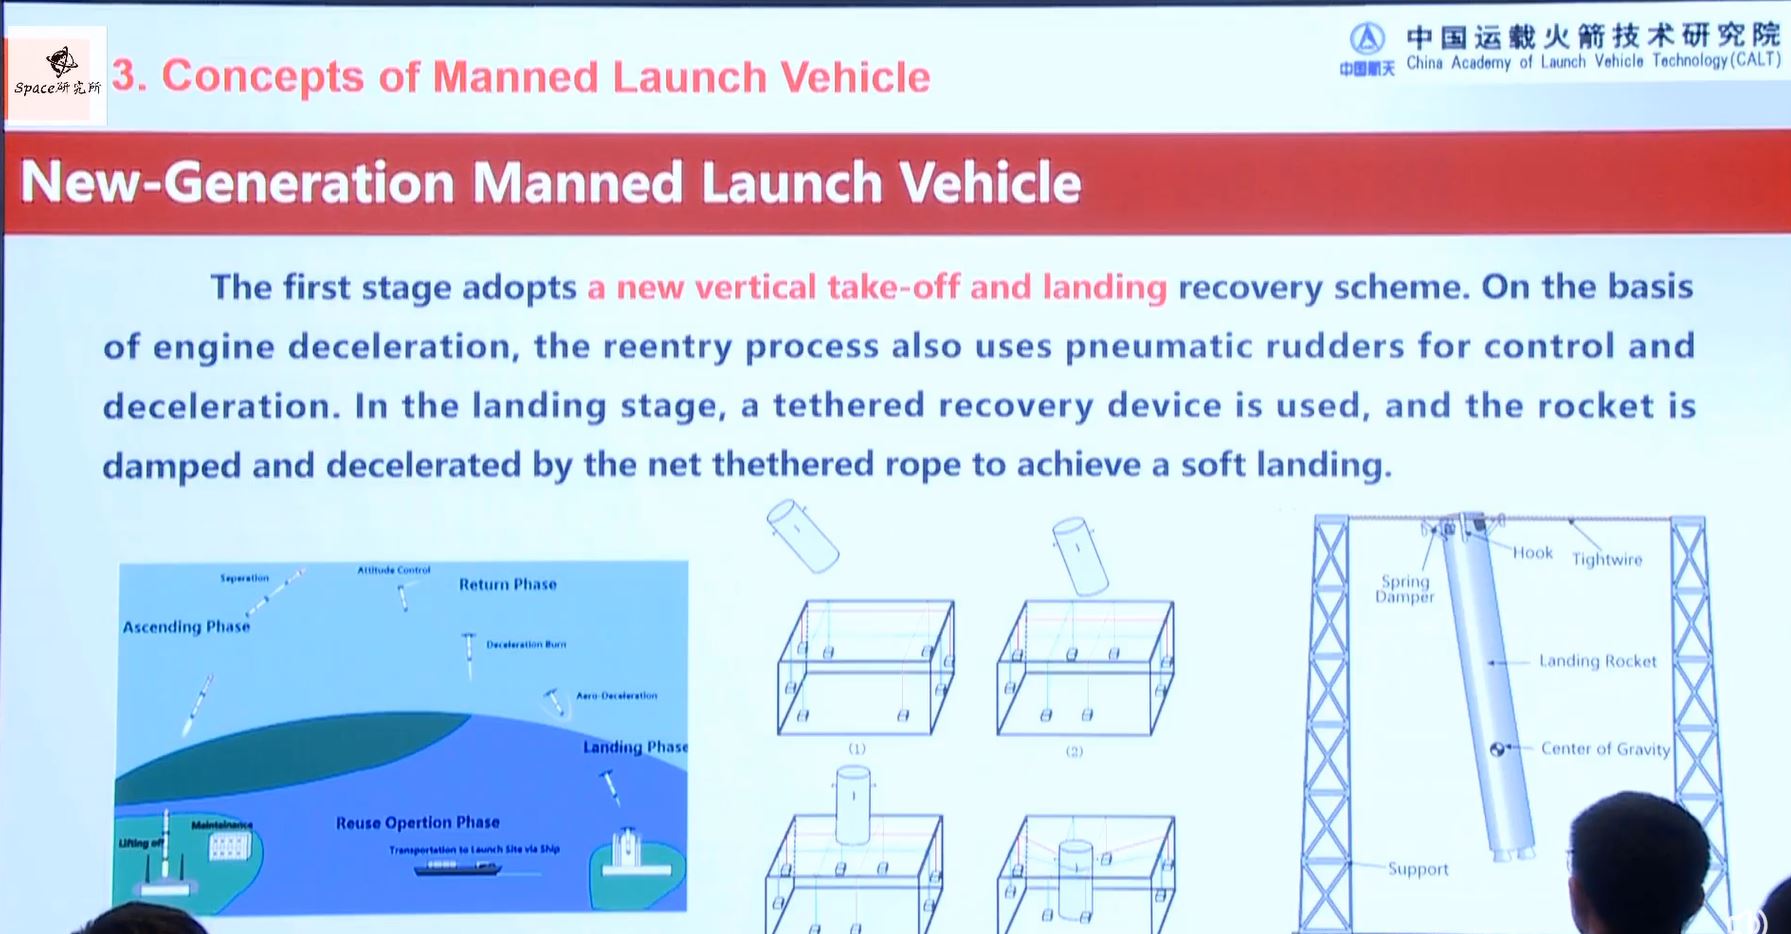 Illustration of the landing system of a new generation Crew Launch Vehicle in China.